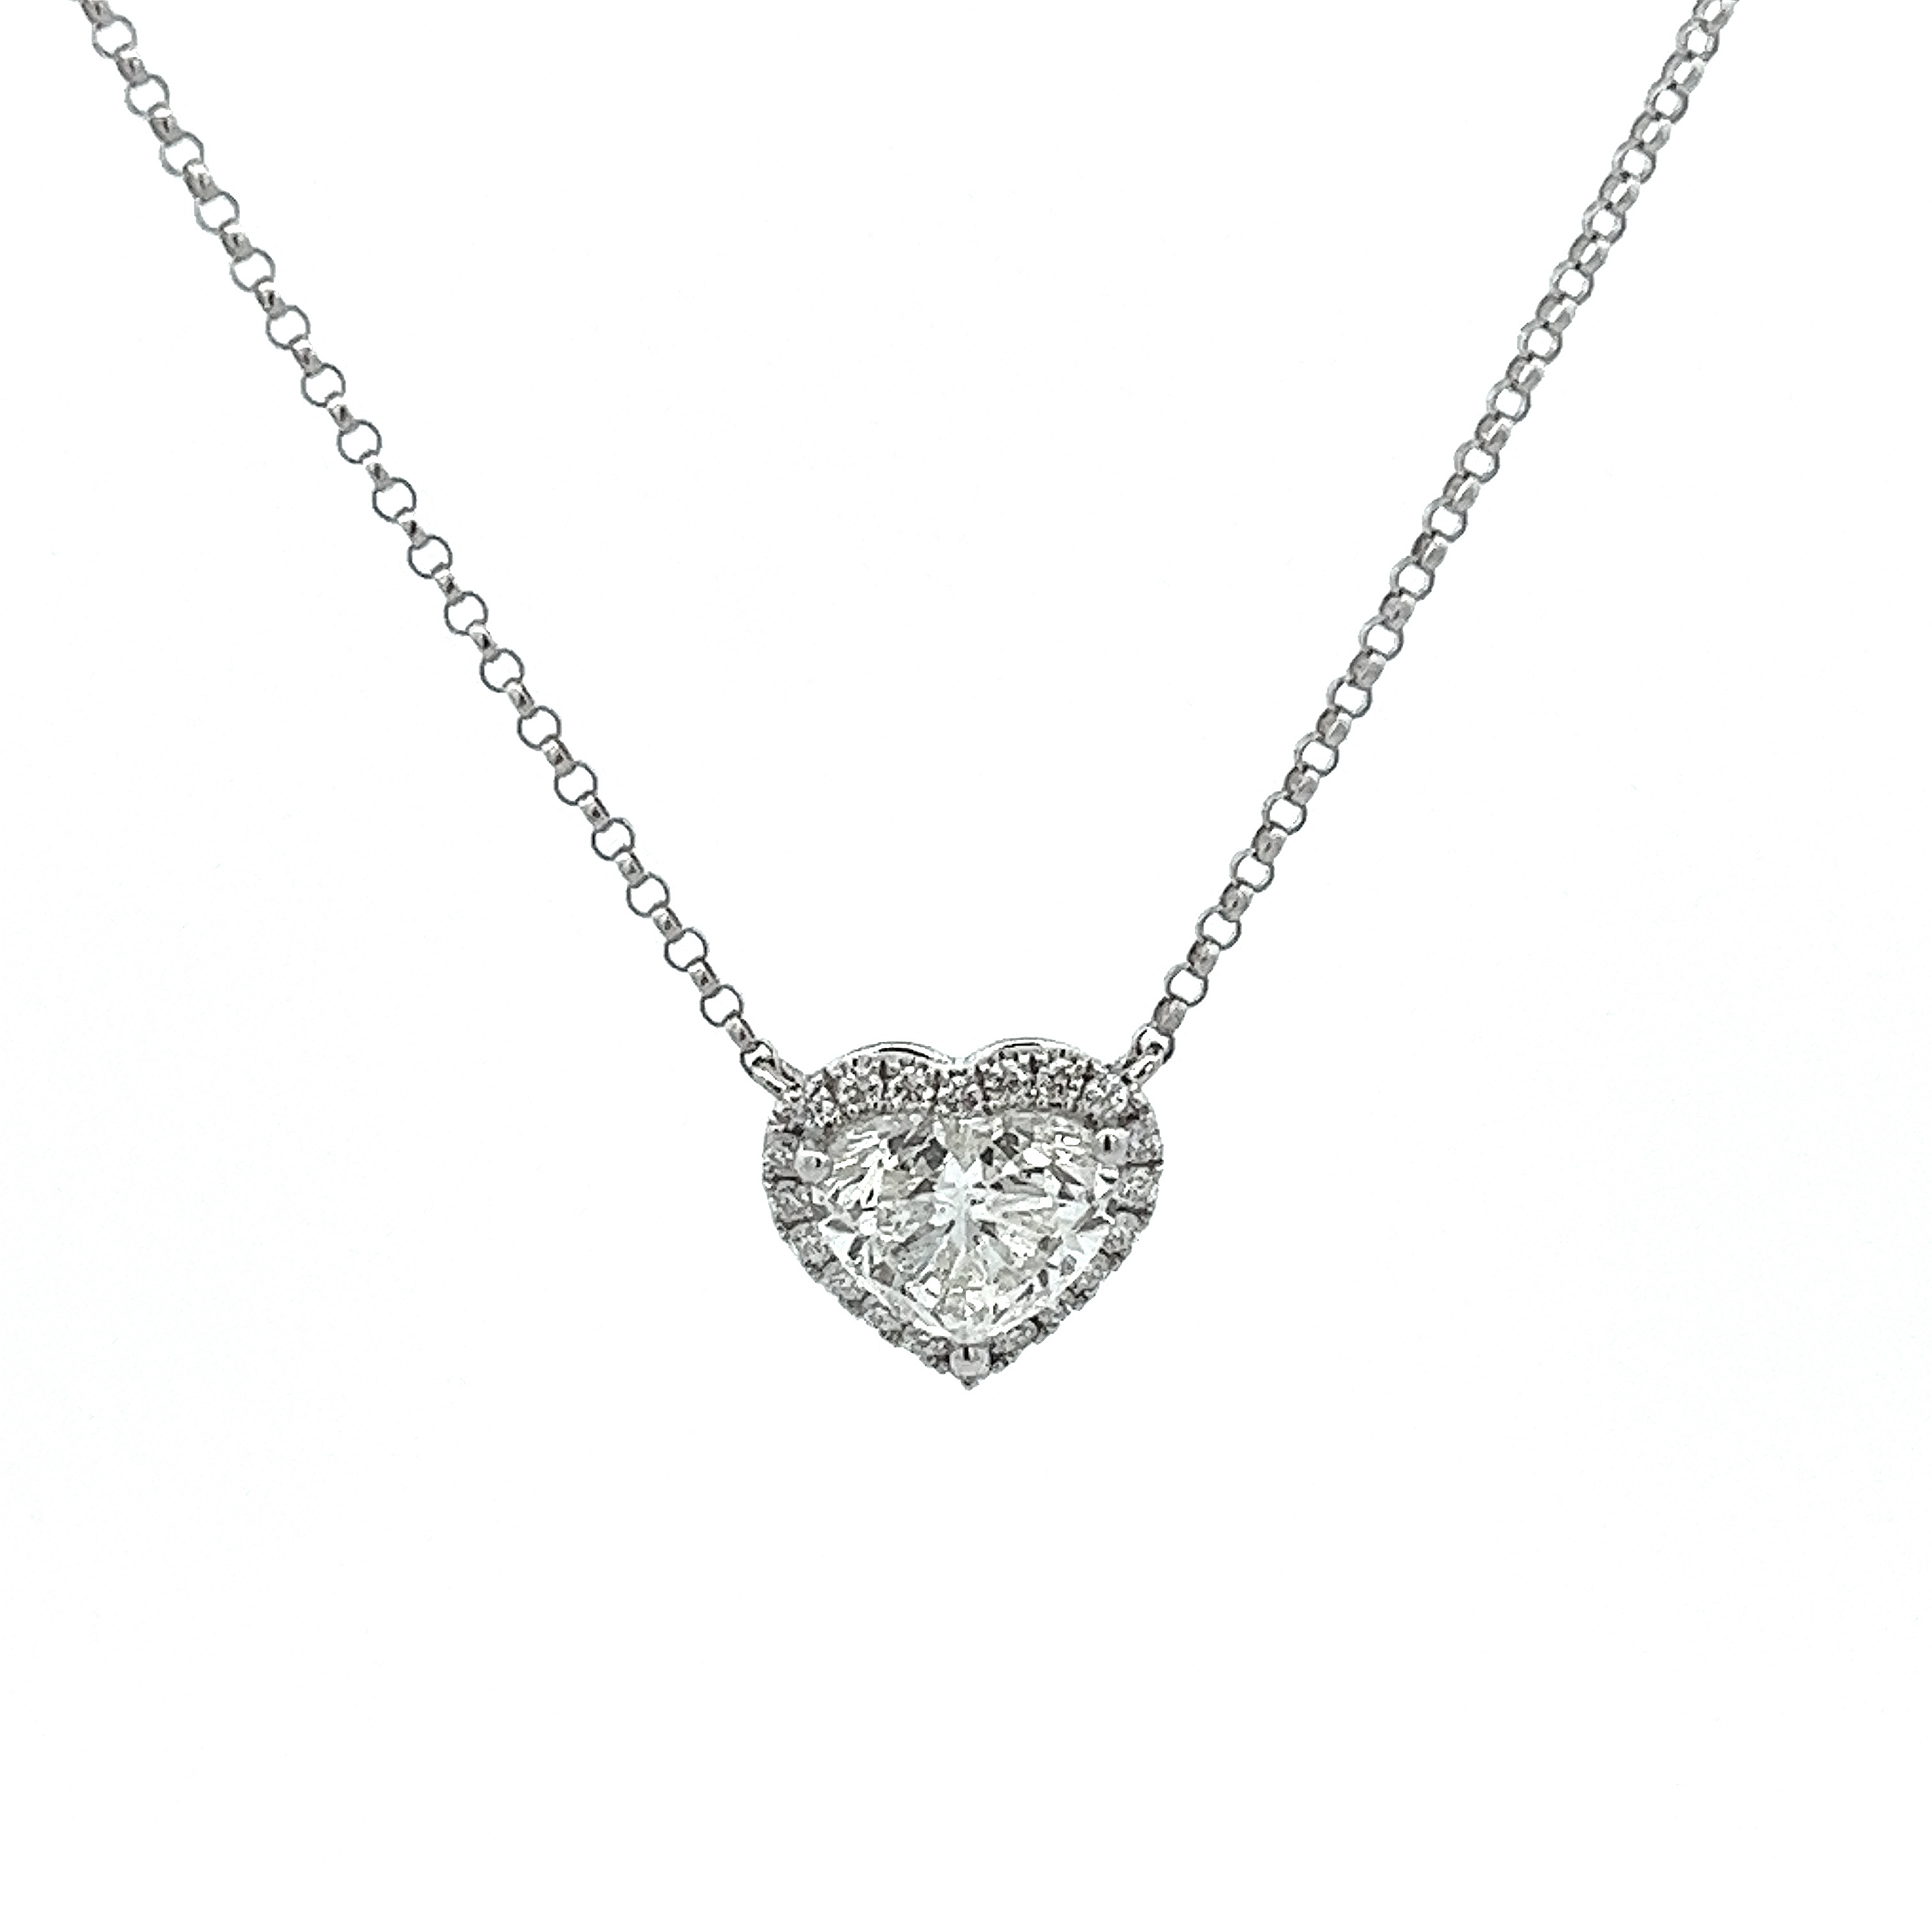 My One and Only Heart Necklace in 10KT Yellow Gold and 925 Sterling Silver